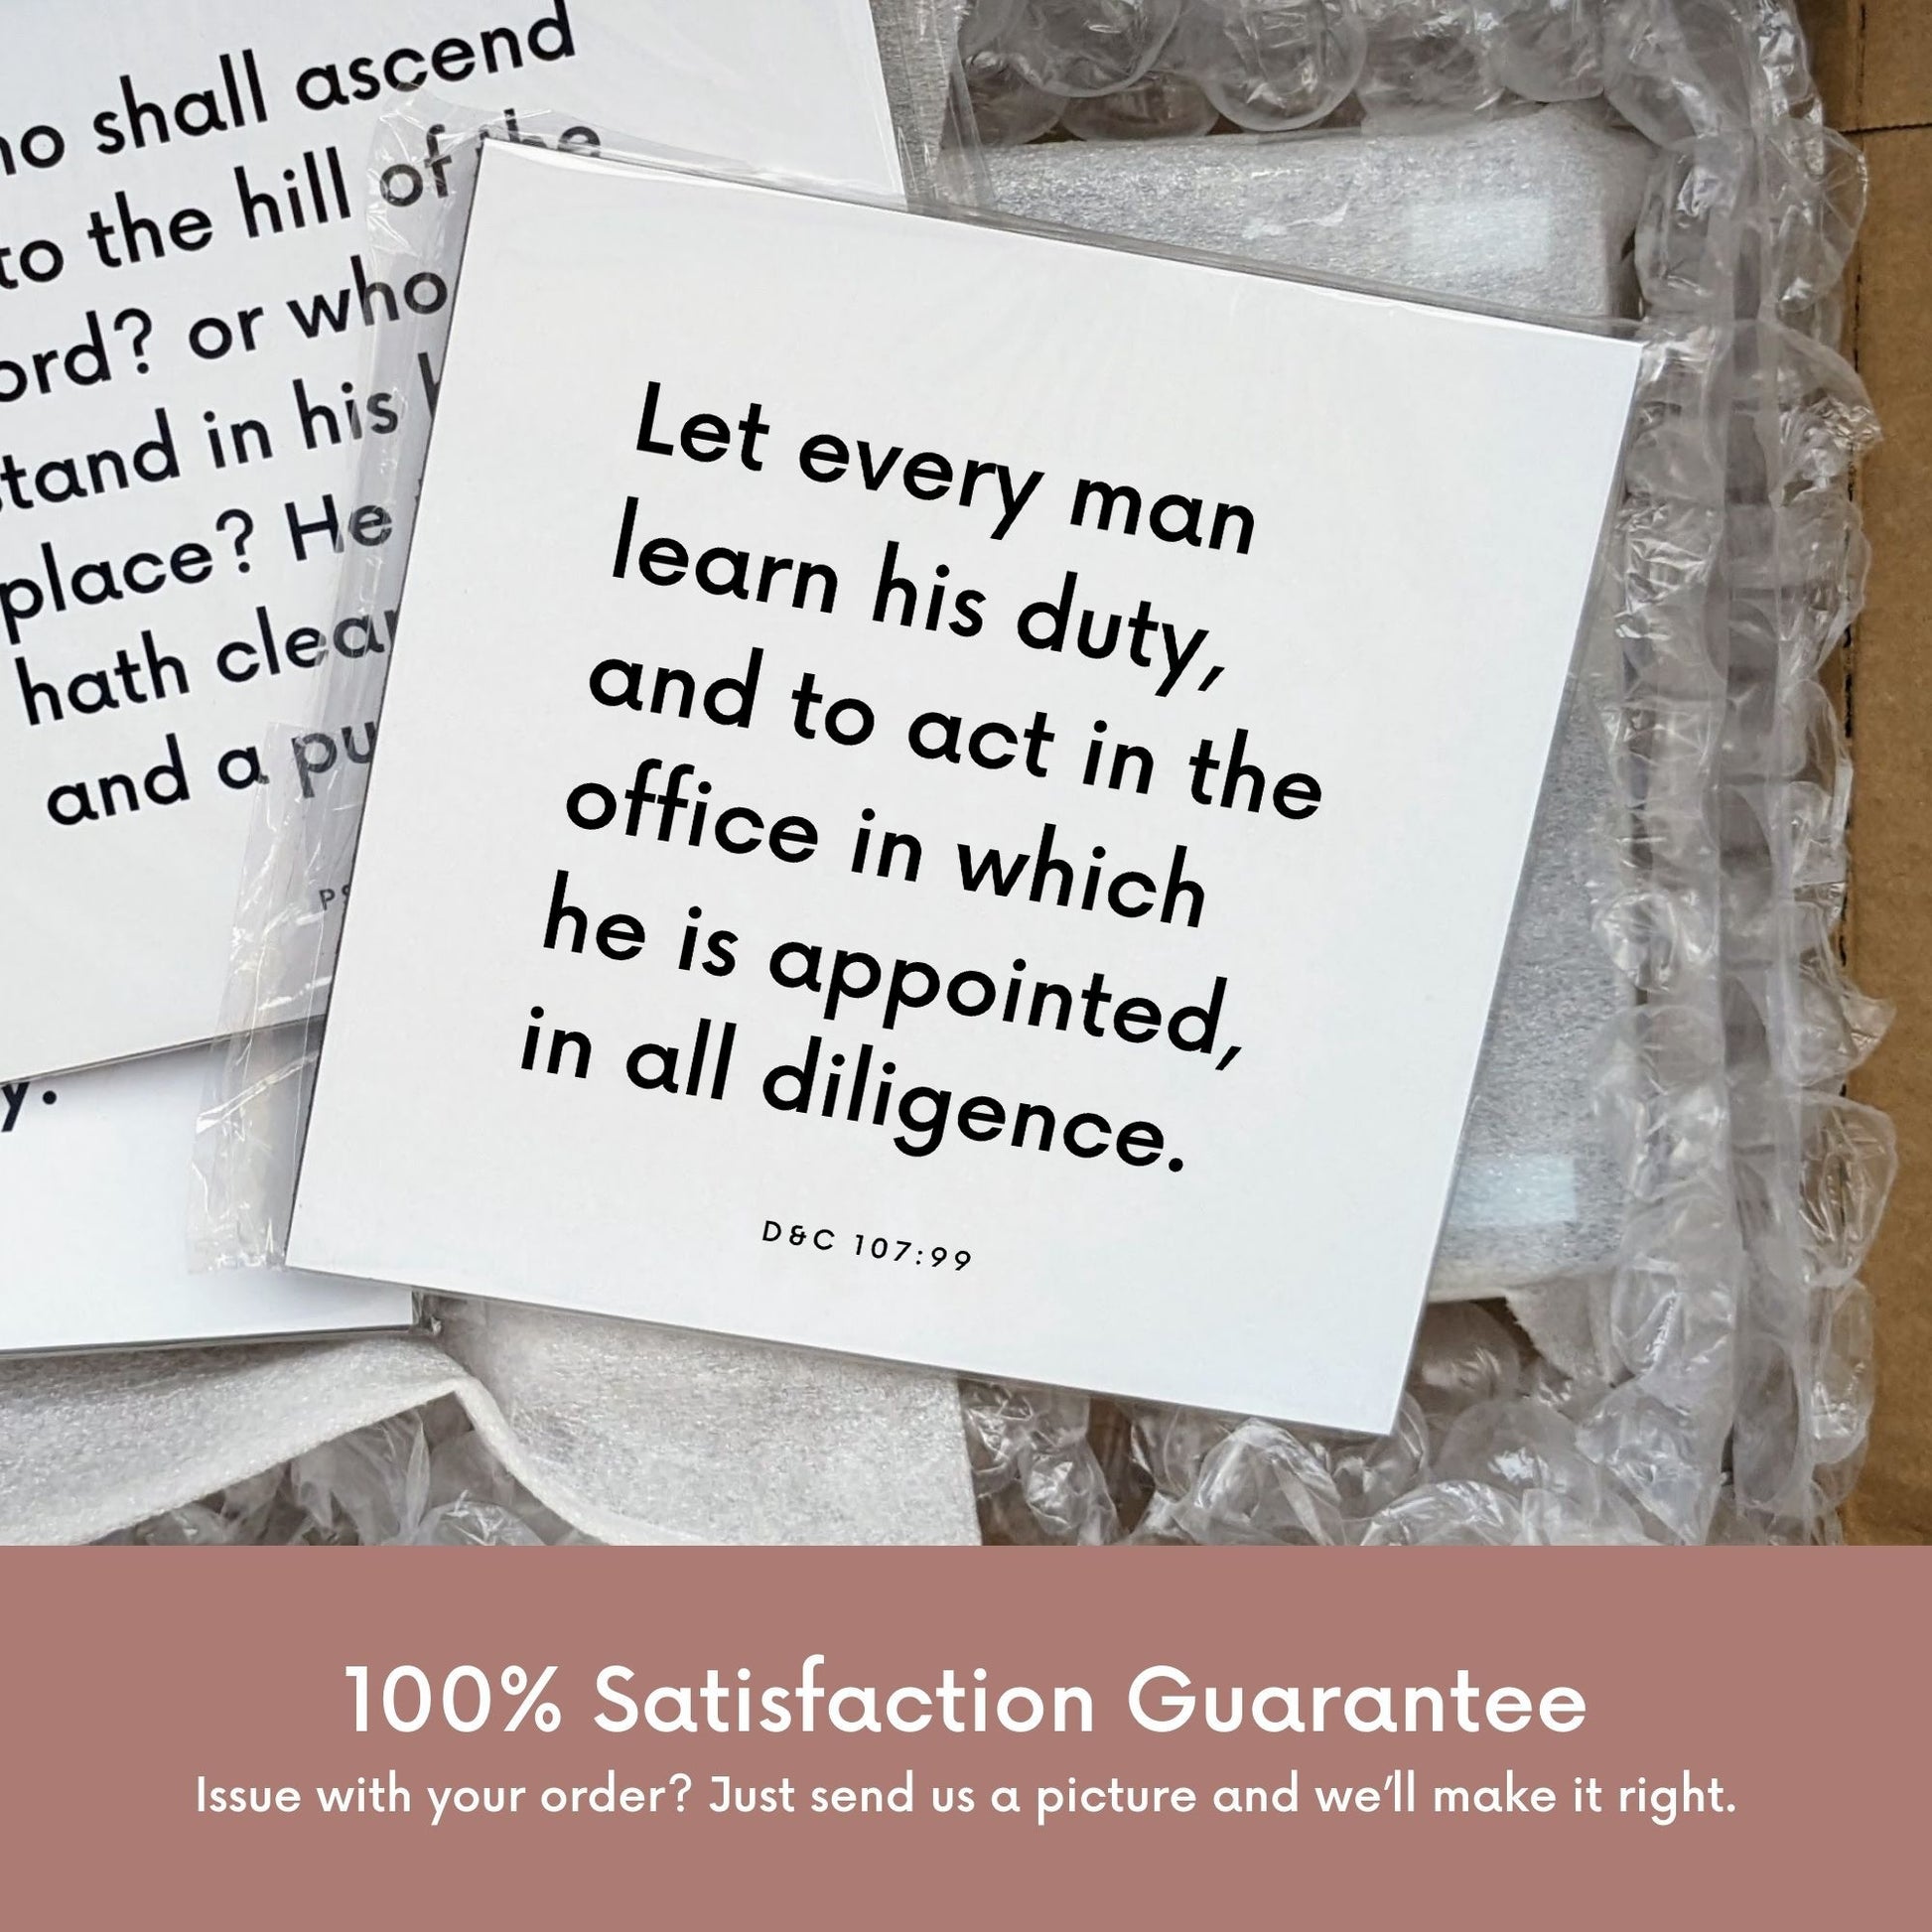 Shipping materials for scripture tile of D&C 107:99 - "Let every man learn his duty"